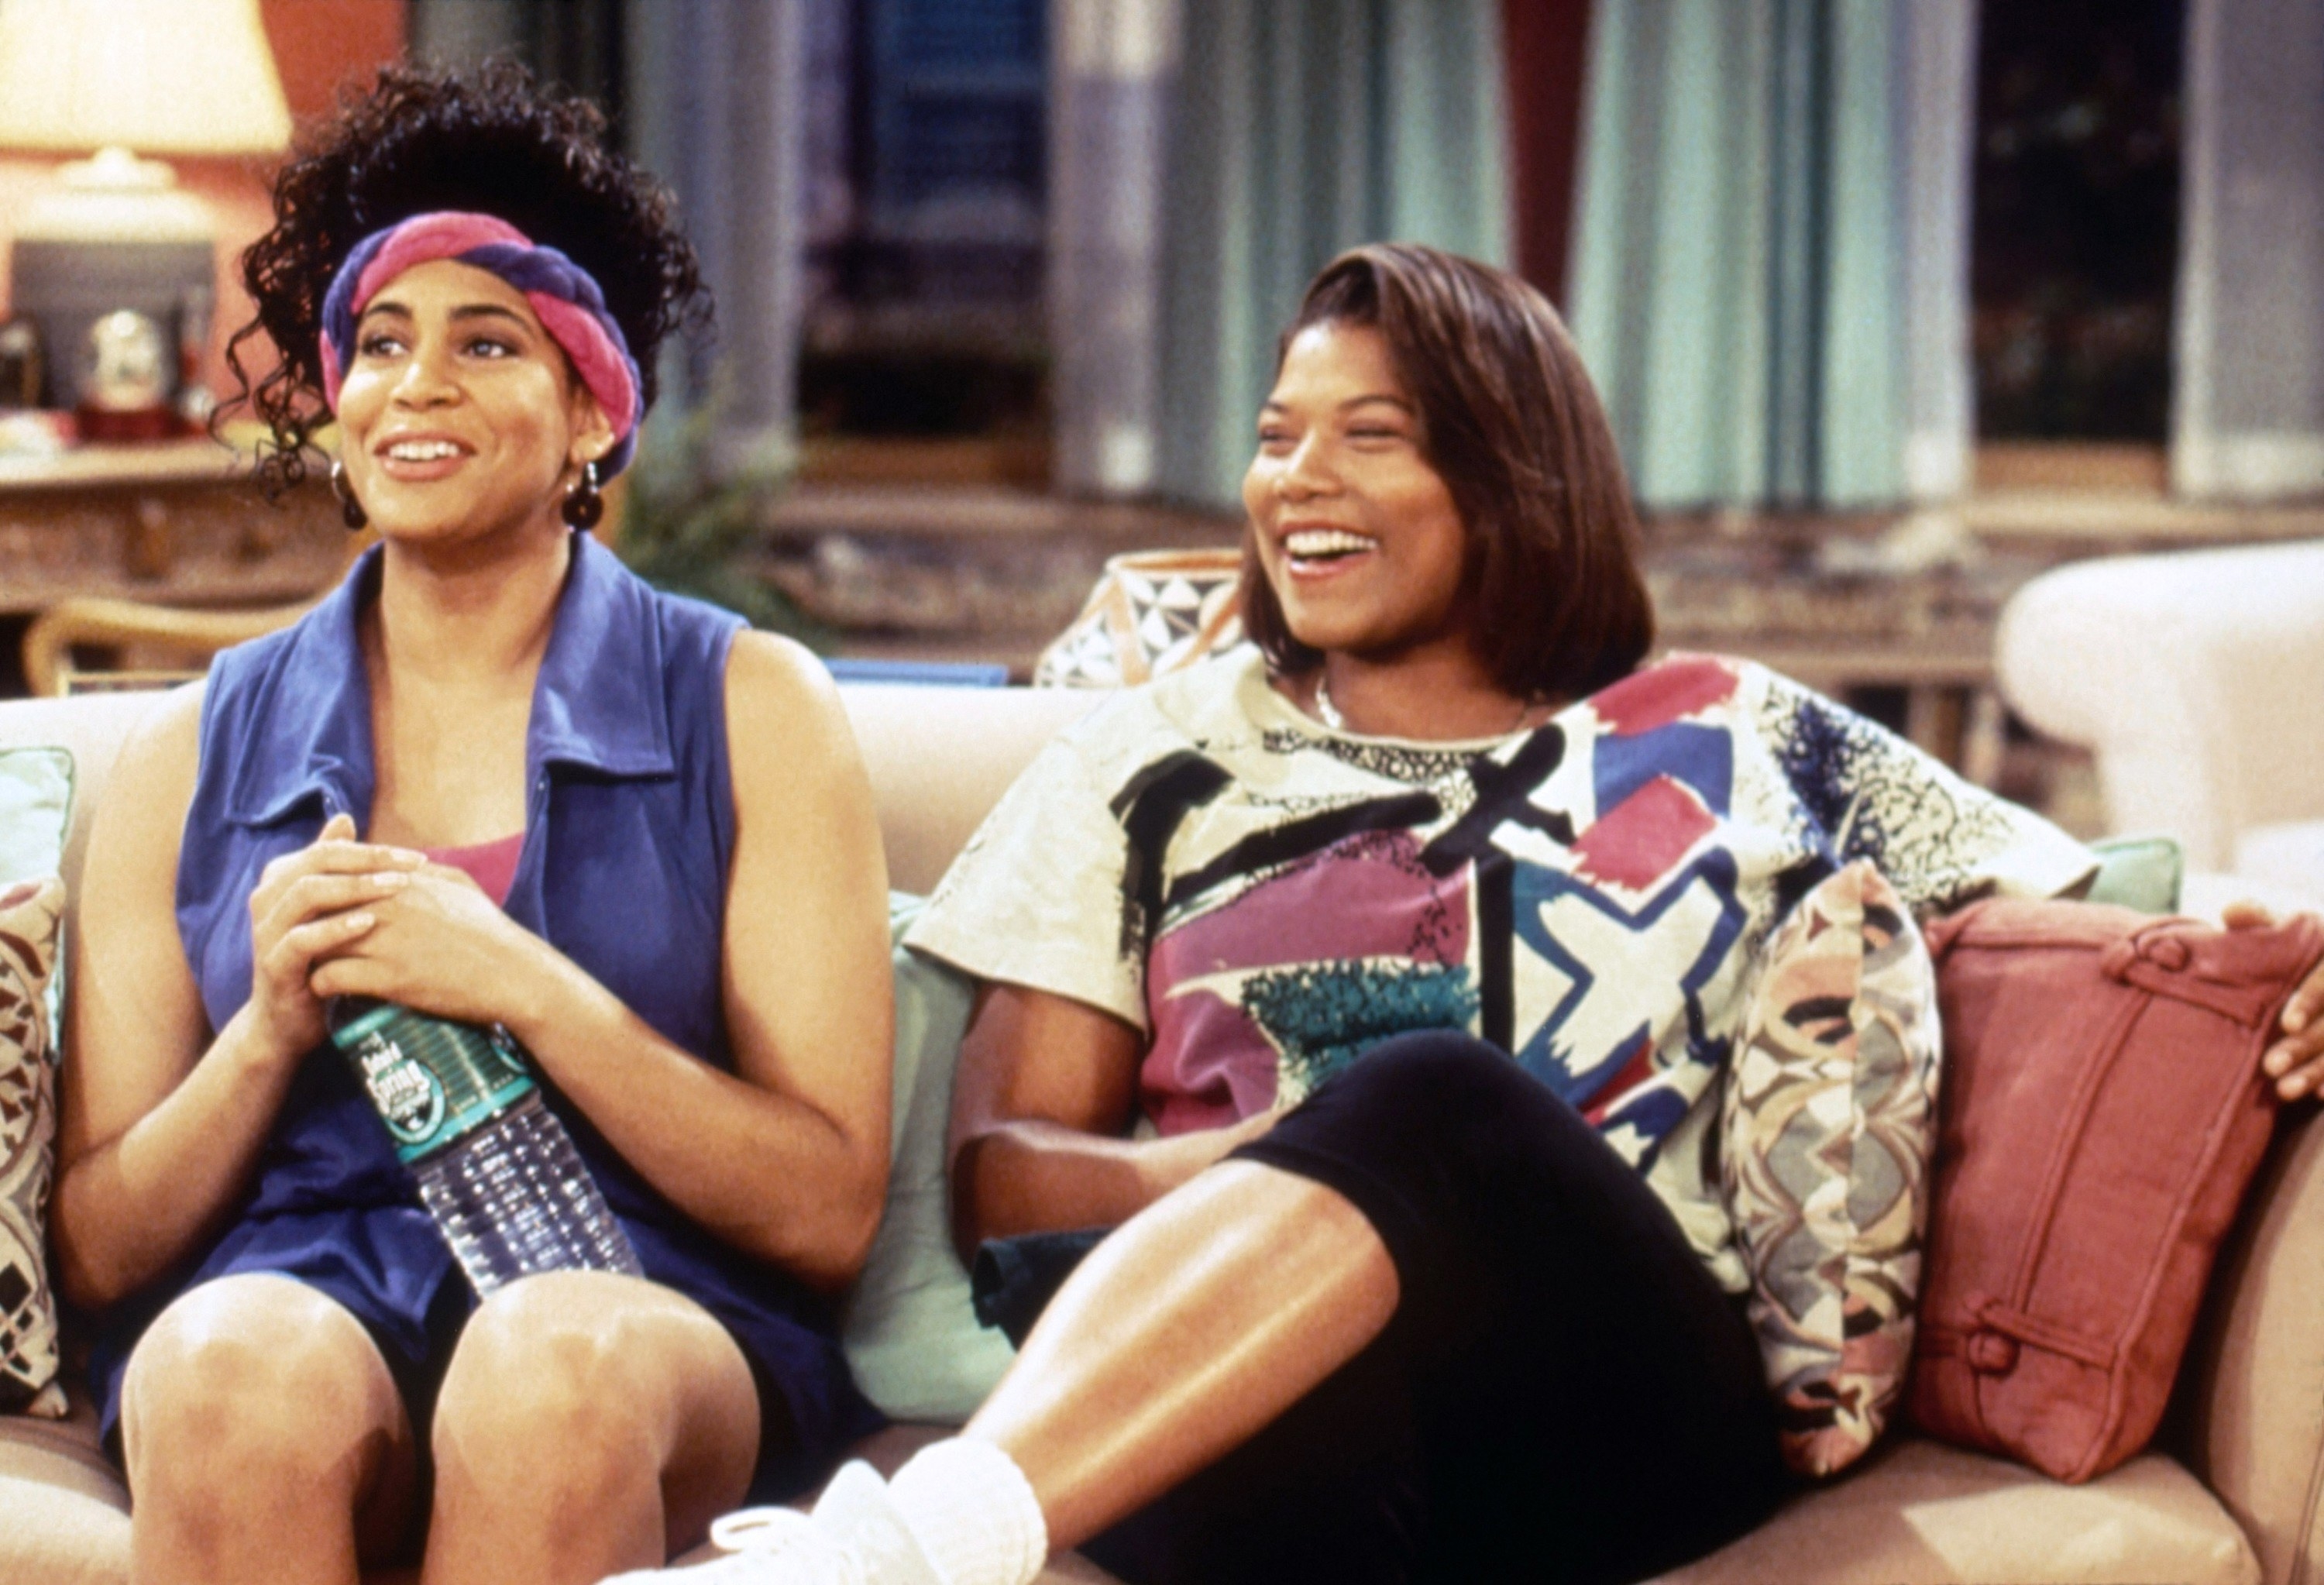 Kim Coles and Queen Latifah laughing on the couch.